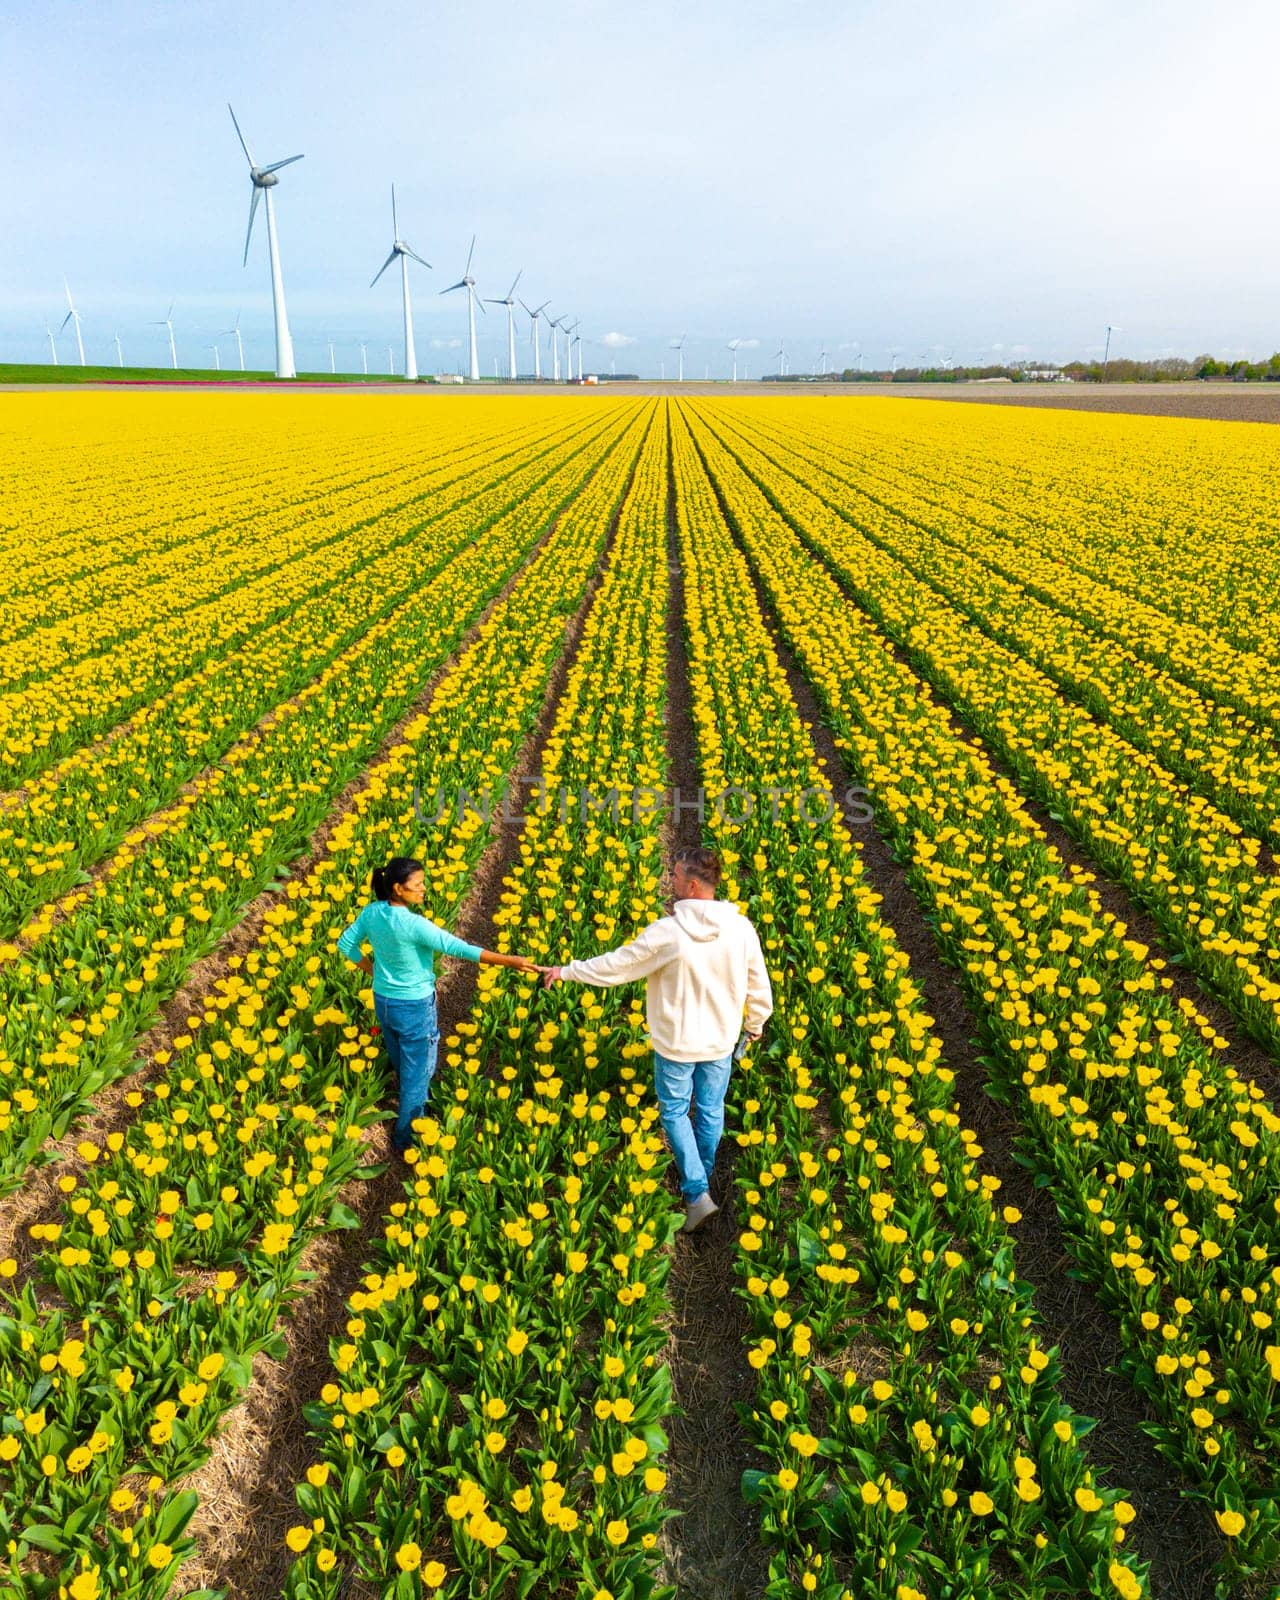 Men and women in tulip flower fields seen from above with a drone in the Netherlands, Tulip fields in the Netherlands during Spring, diverse couple in spring flower field